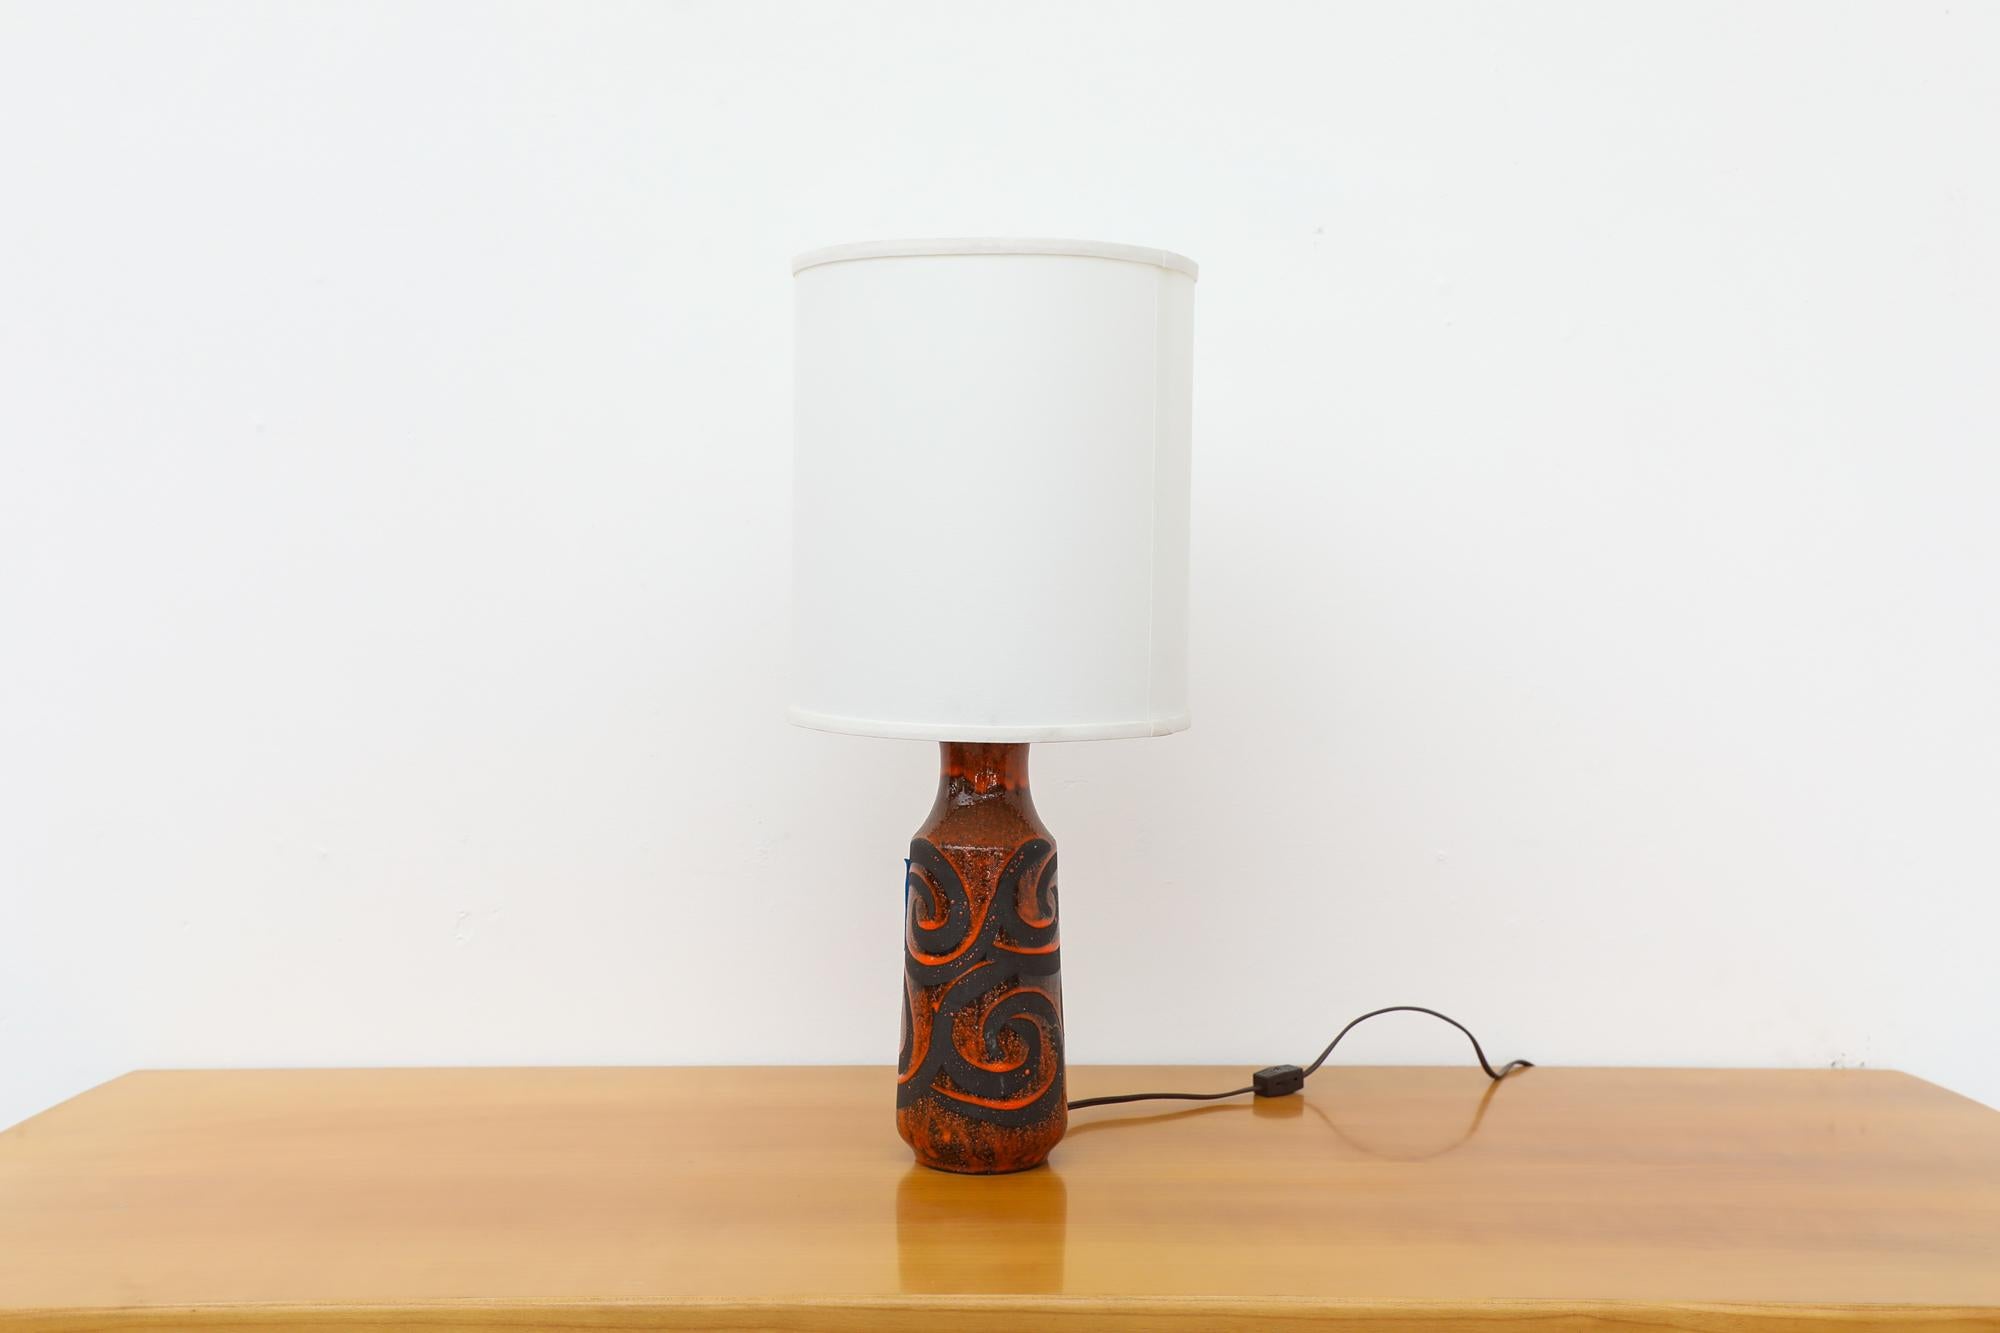 This beautiful Mid-Century table lamp has a ceramic black and red swirl glazed design base and newer white linen shade. The socket uses a standard size bulb. The base and structure are in original condition with visible wear consistent with its age